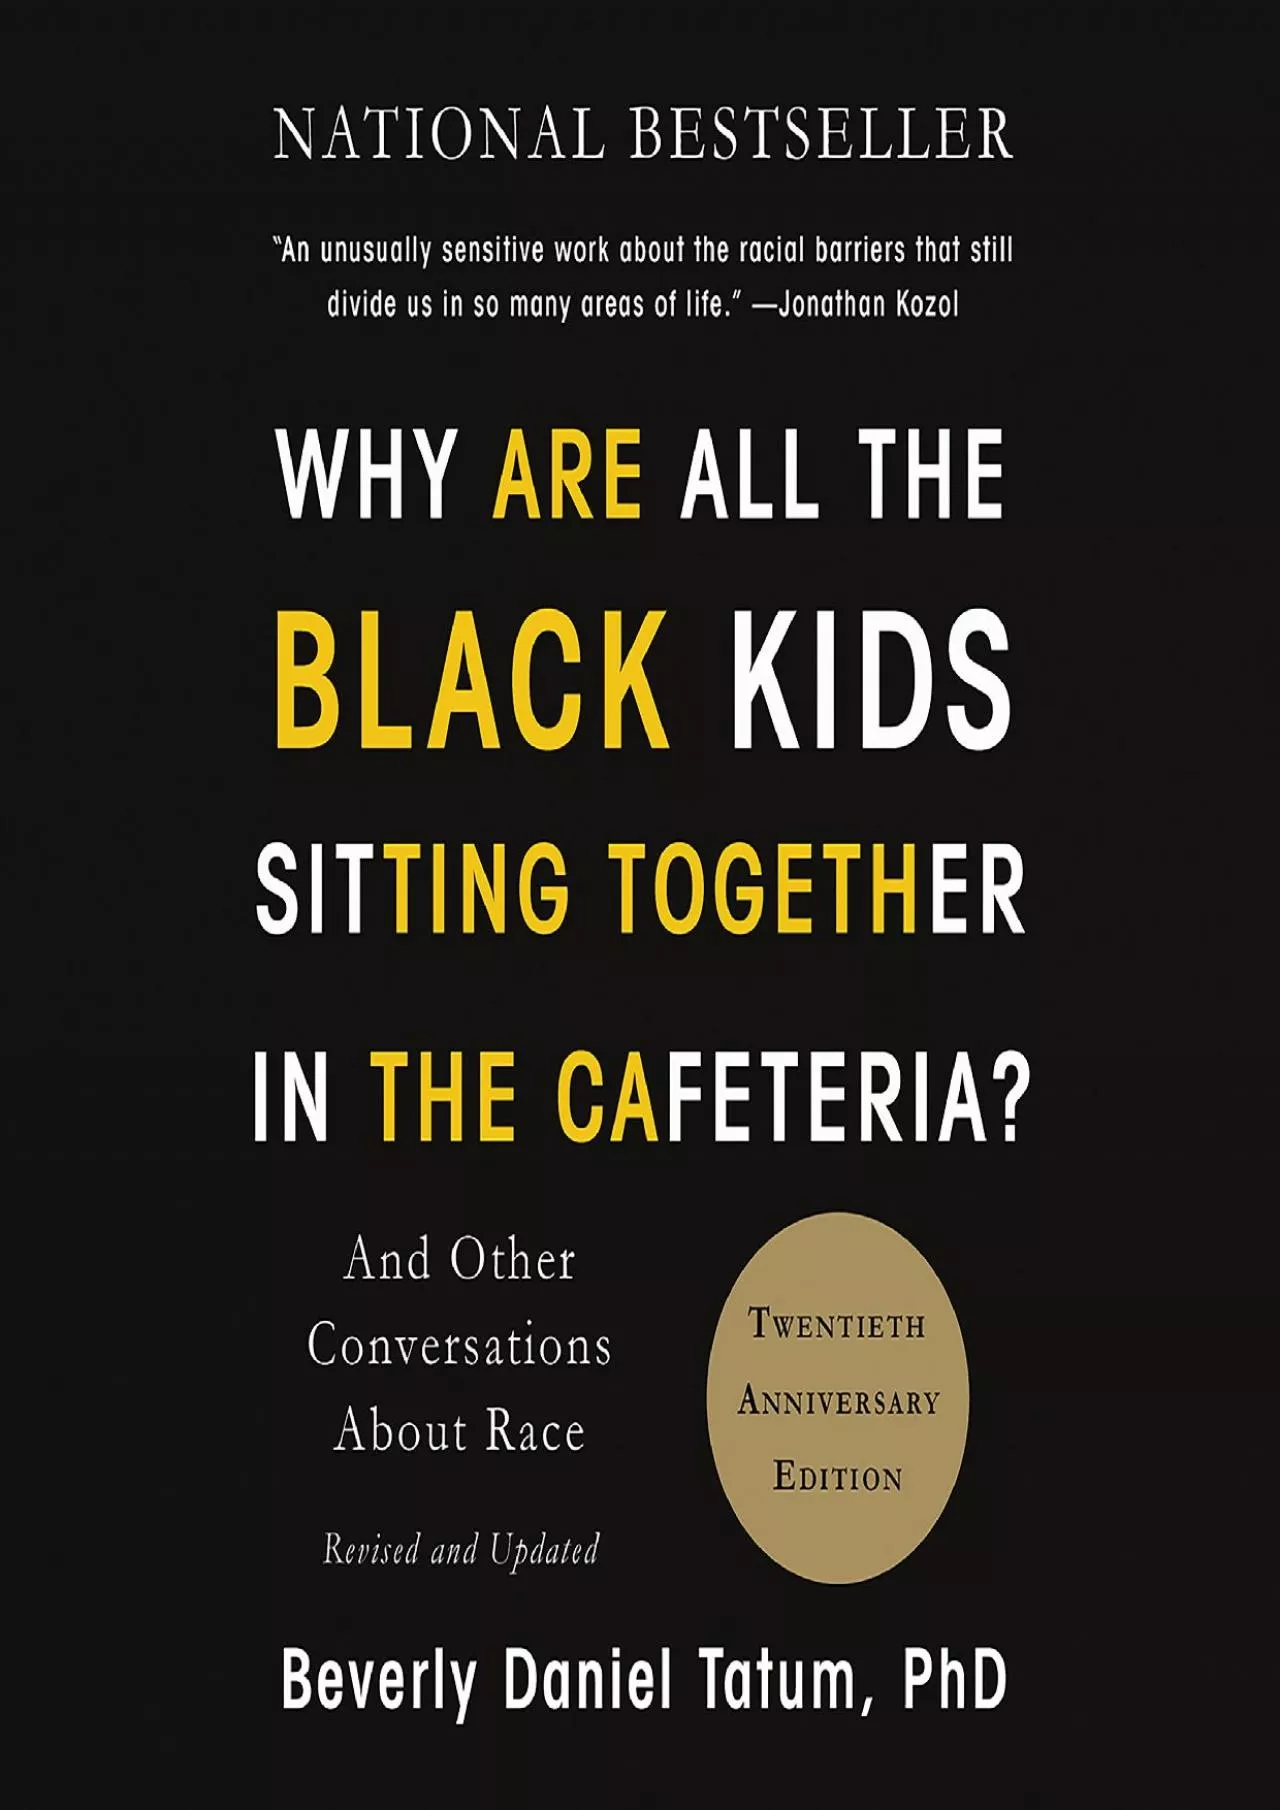 (BOOK)-Why Are All the Black Kids Sitting Together in the Cafeteria?: And Other Conversations